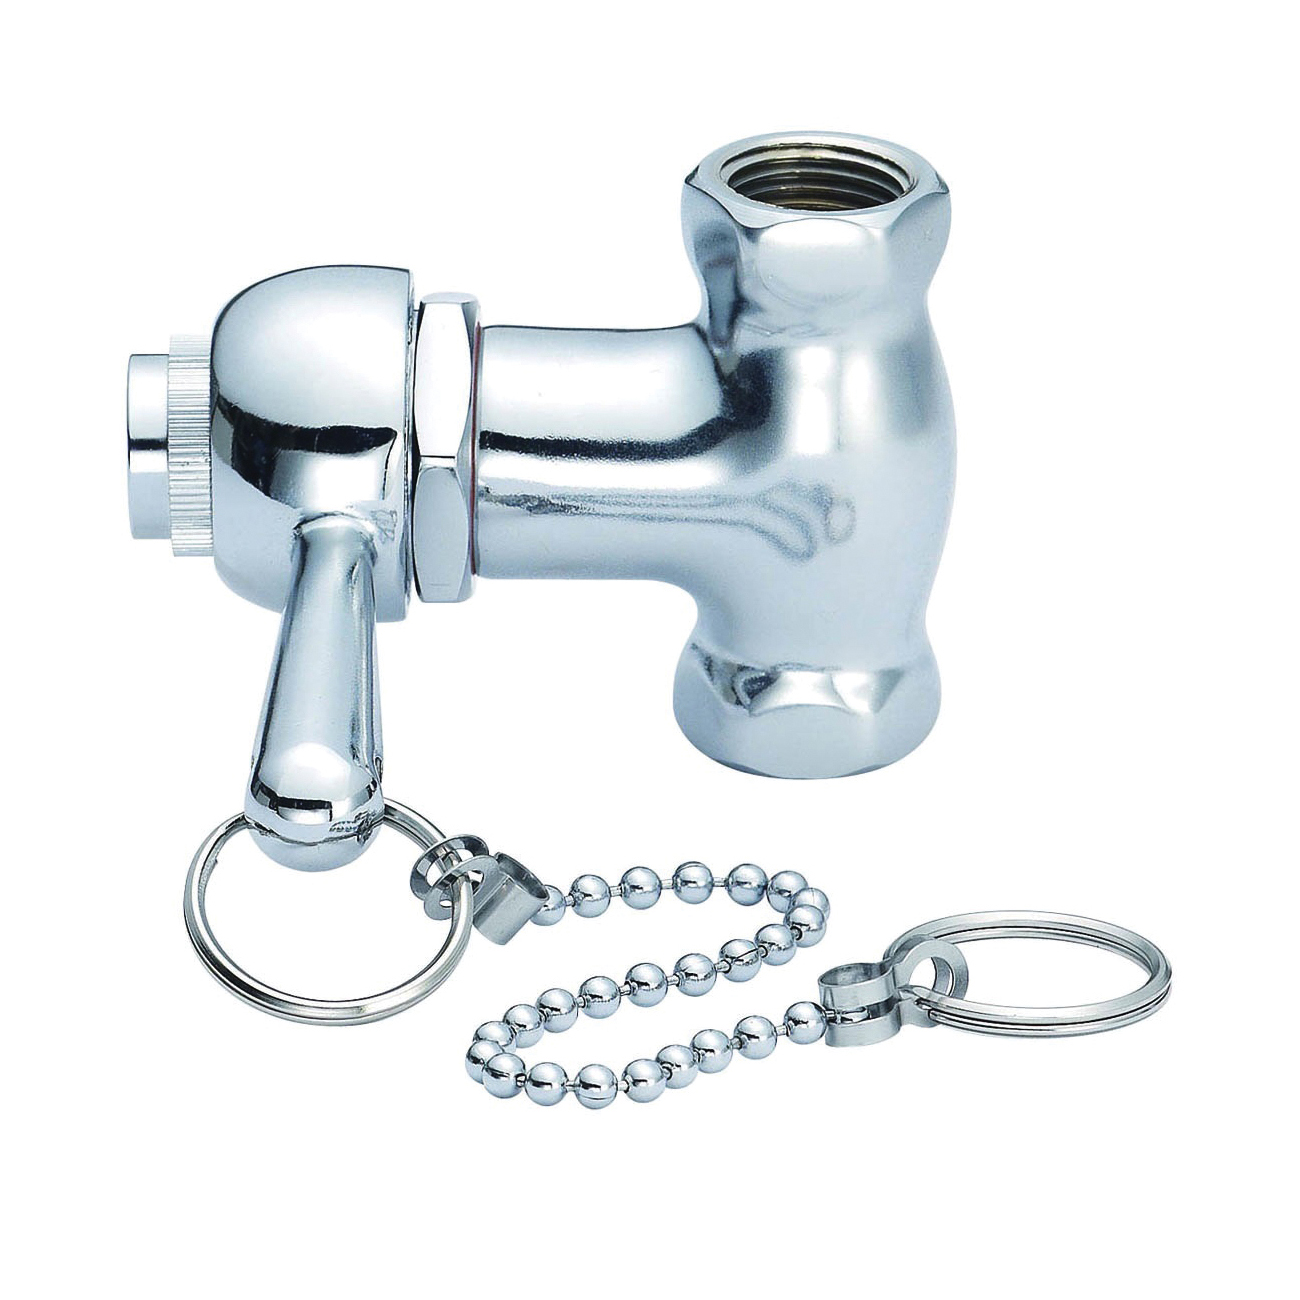 126-006LT Shower Valve with Pull Chain, 1/2 in Connection, Brass Body, Chrome